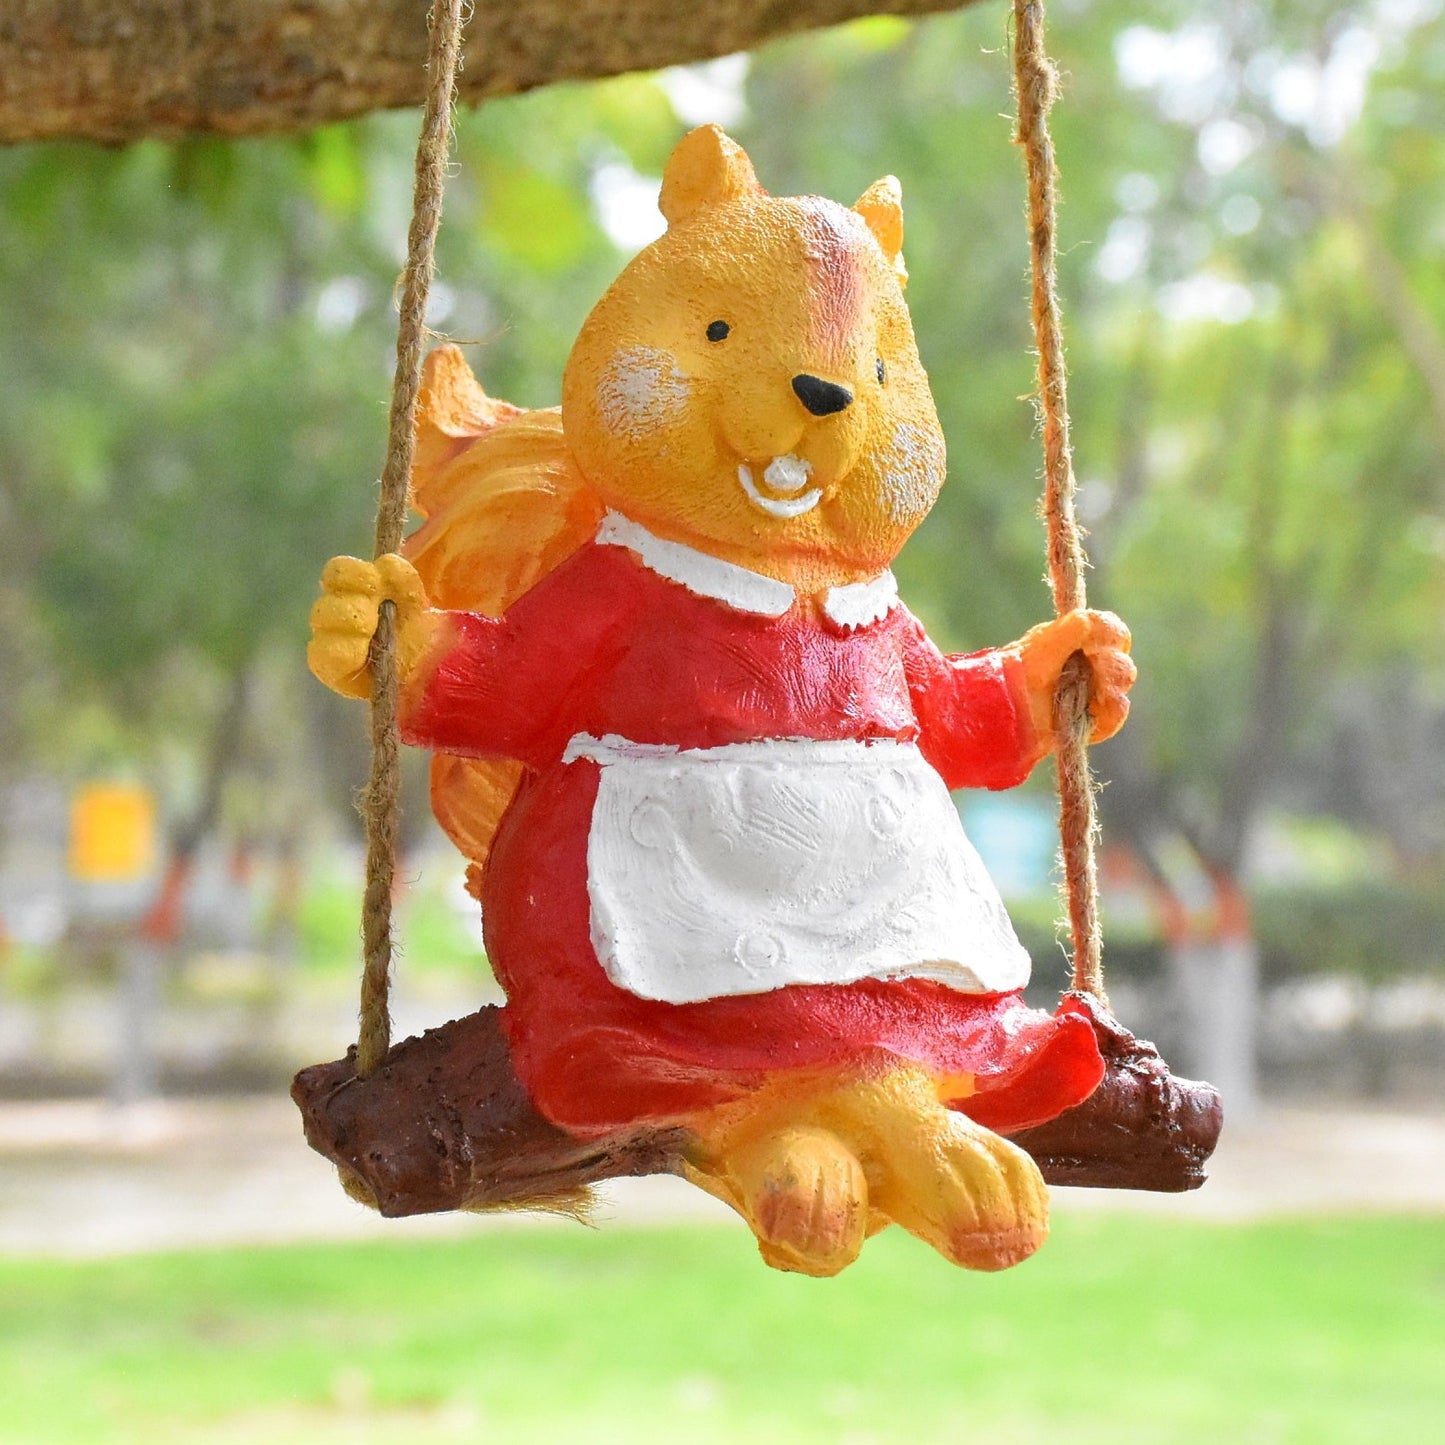 Poly-Resin Hanging Decor for Garden, Home, Gift (Chef Squirrel)